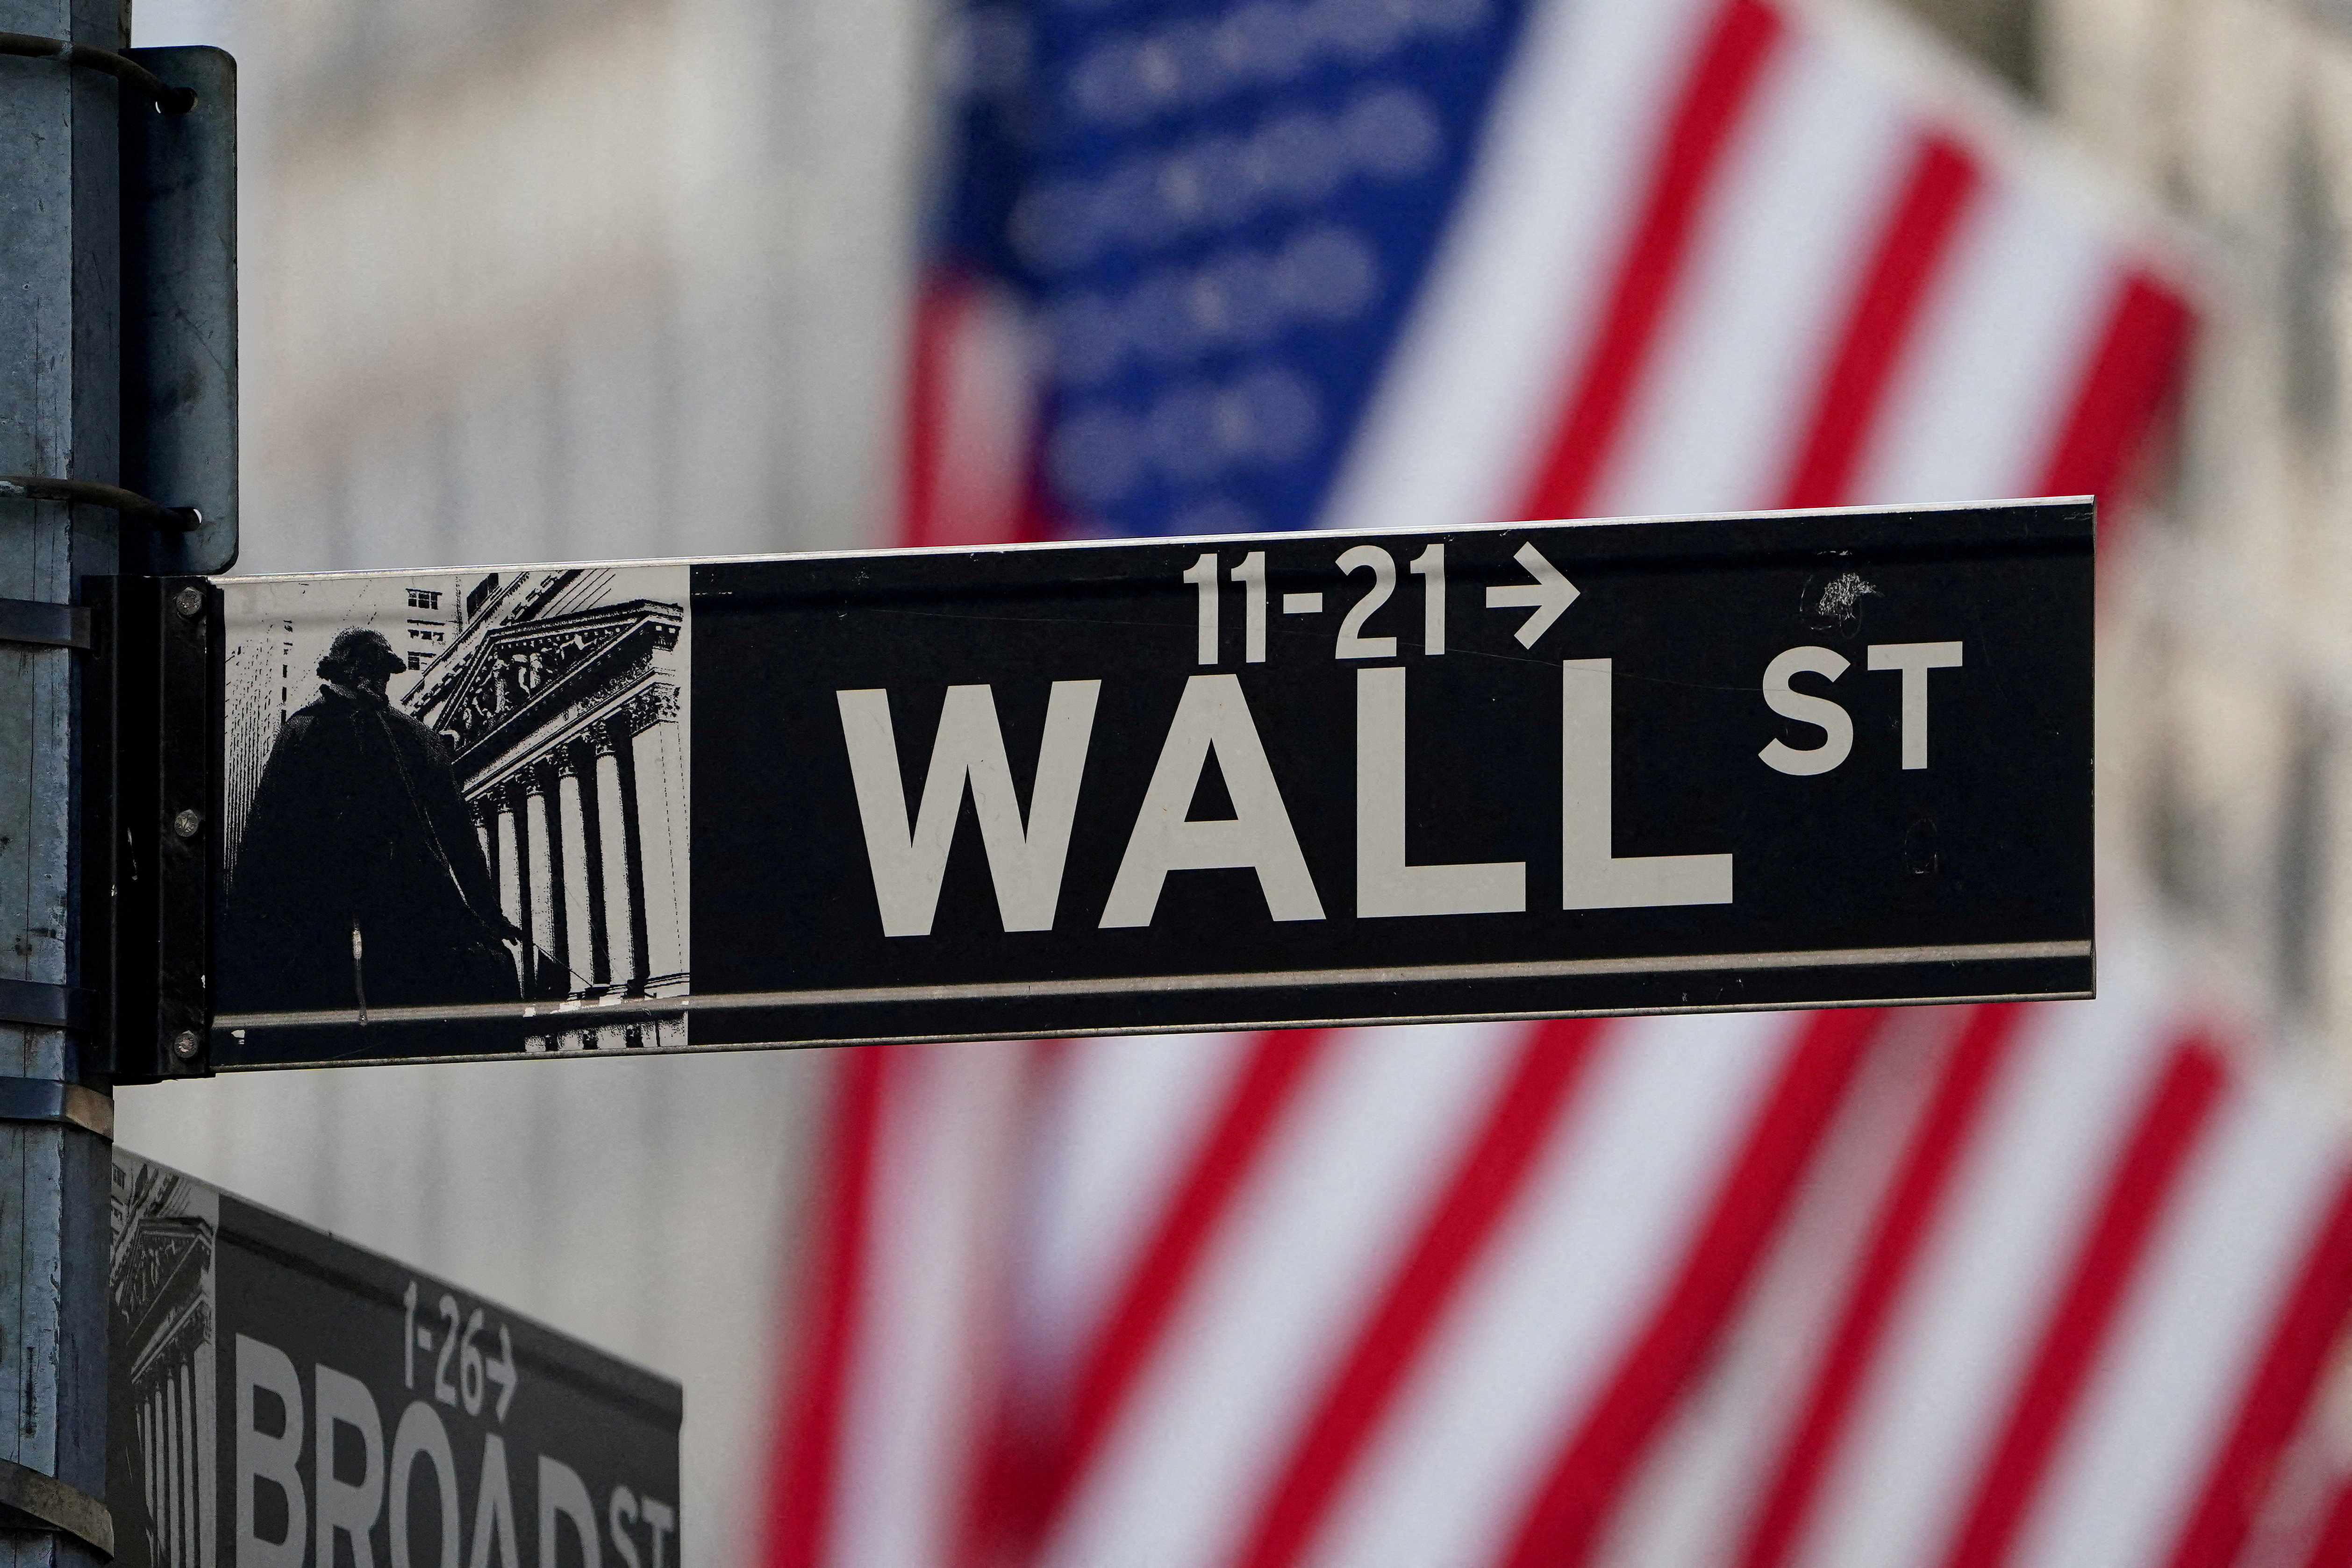 The Wall Street sign is pictured at the New York Stock exchange (NYSE) in New York City, United States